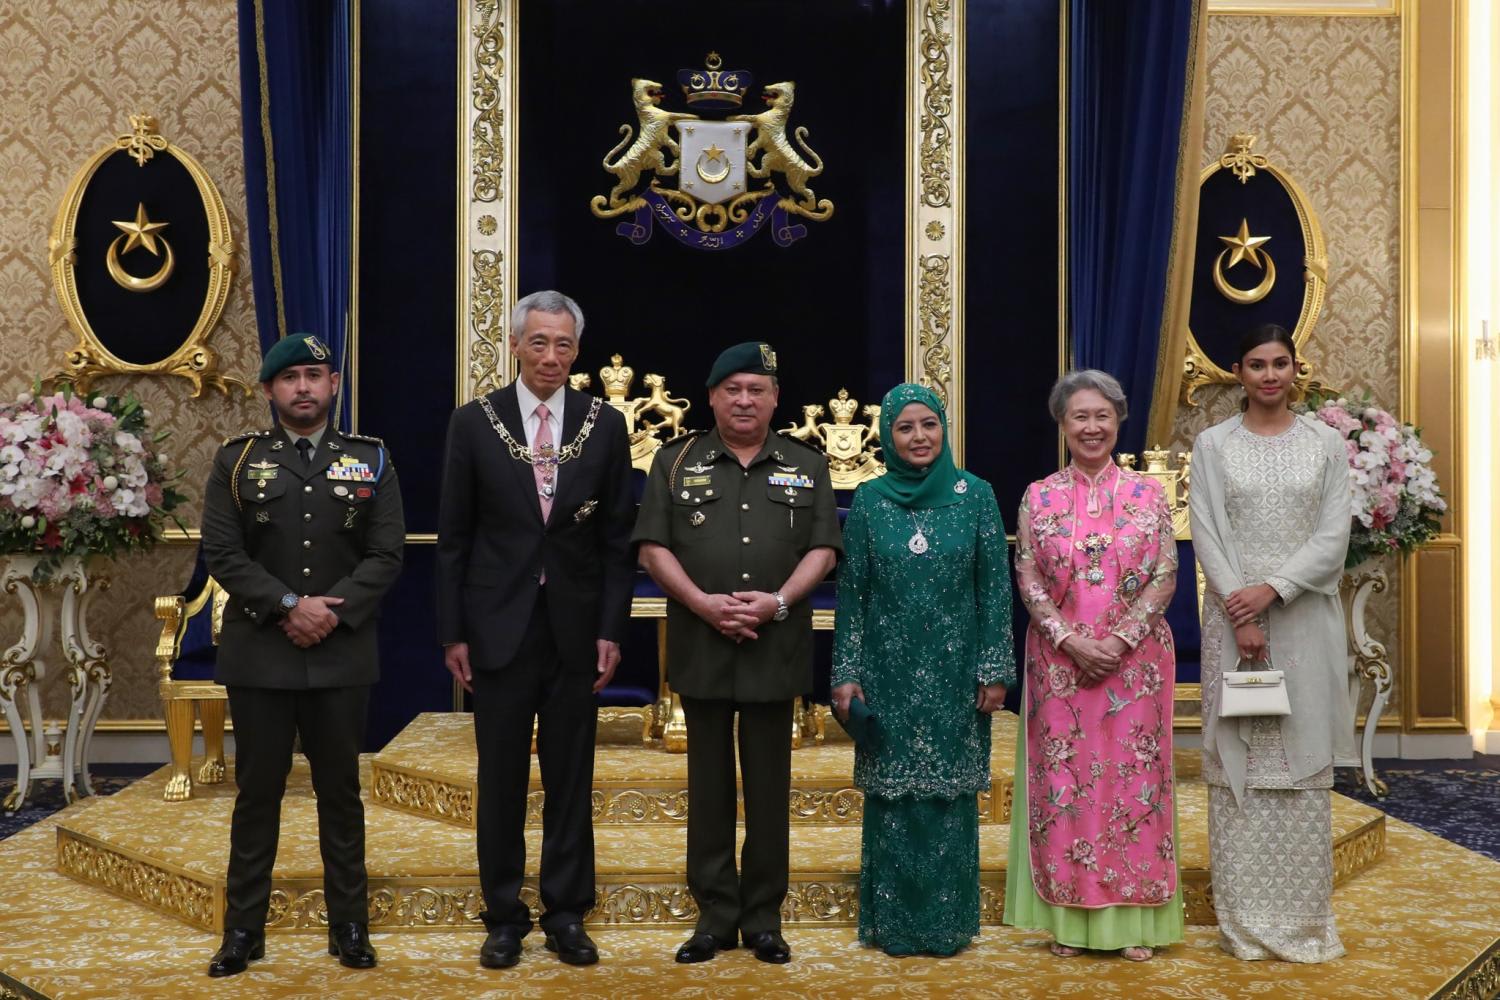 Prime Minister Lee Hsien Loong and Mdm Ho Ching at the Johore State Award Investiture Ceremony on May 6, 2022, with the Sultan of Johor, Sultan Ibrahim Ibni Almarhum Sultan Iskandar, and his wife, Raja Zarith Sofiah, the Johor crown prince Tunku Ismail Sultan Ibrahim and his wife Che’ Puan Besar Khaleeda.